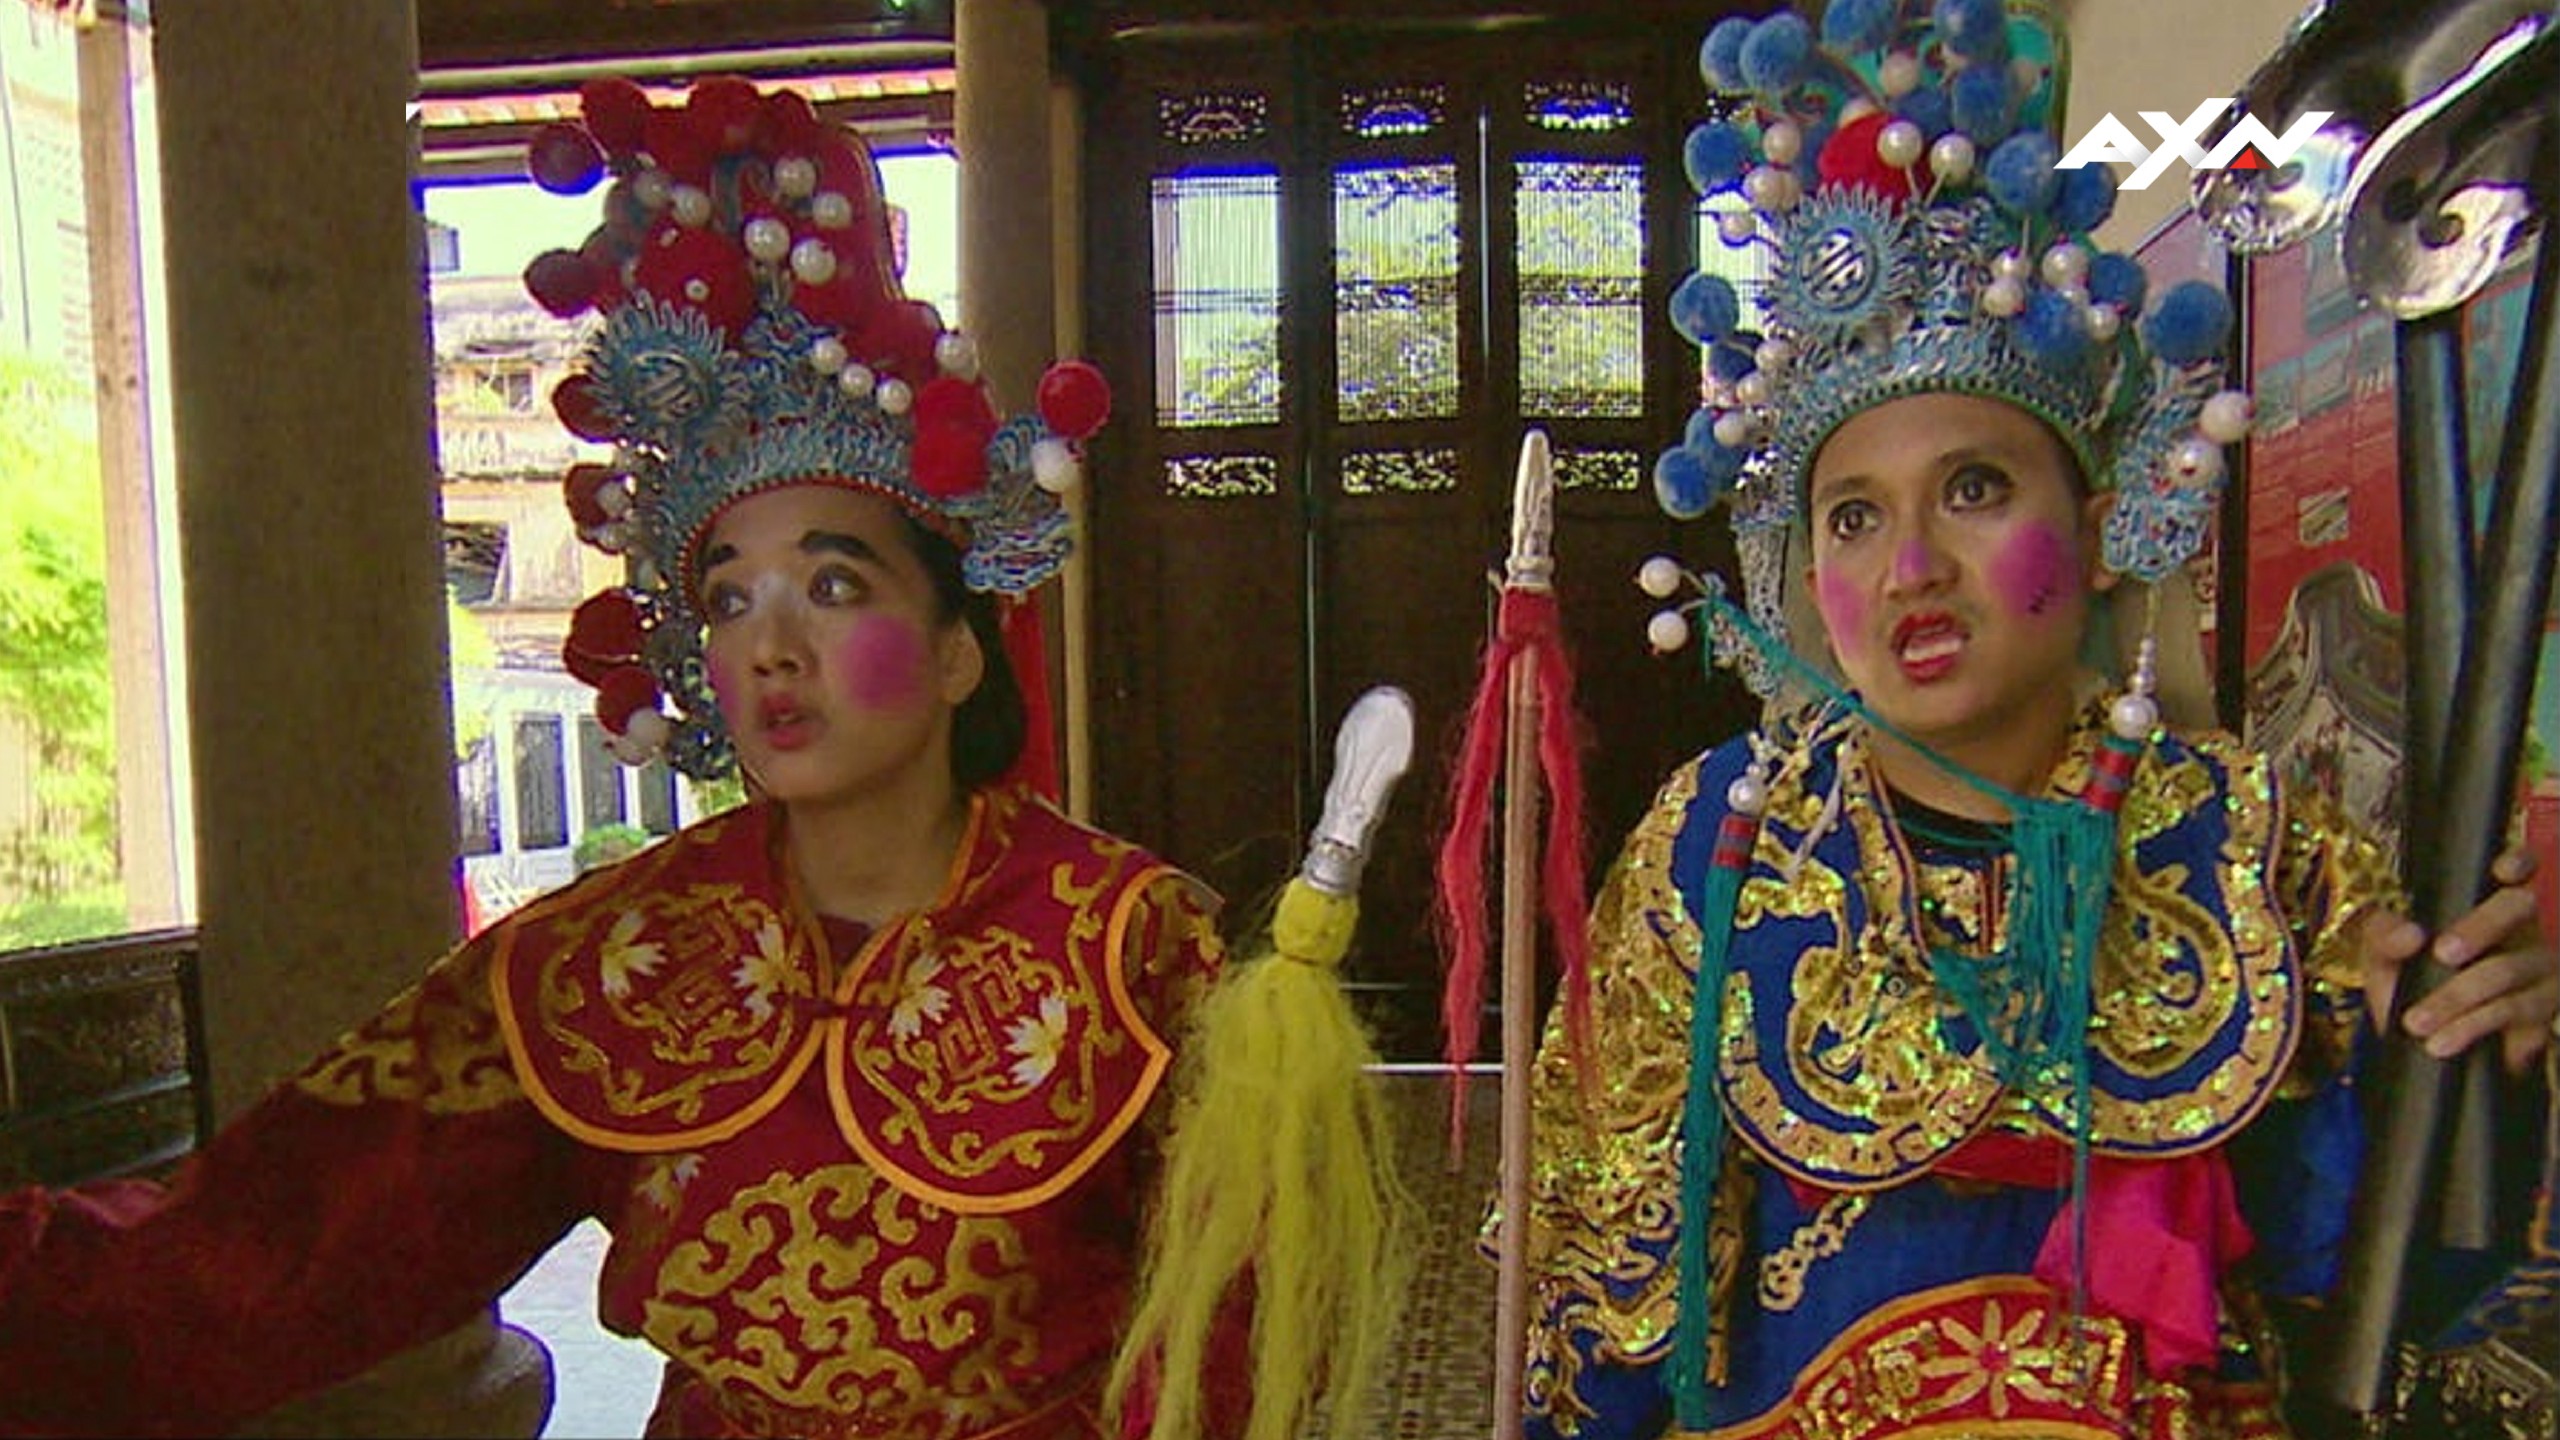 Recap: The Amazing Race Asia 5, Episode 3 – "You don't have to stroke me, it's okay."